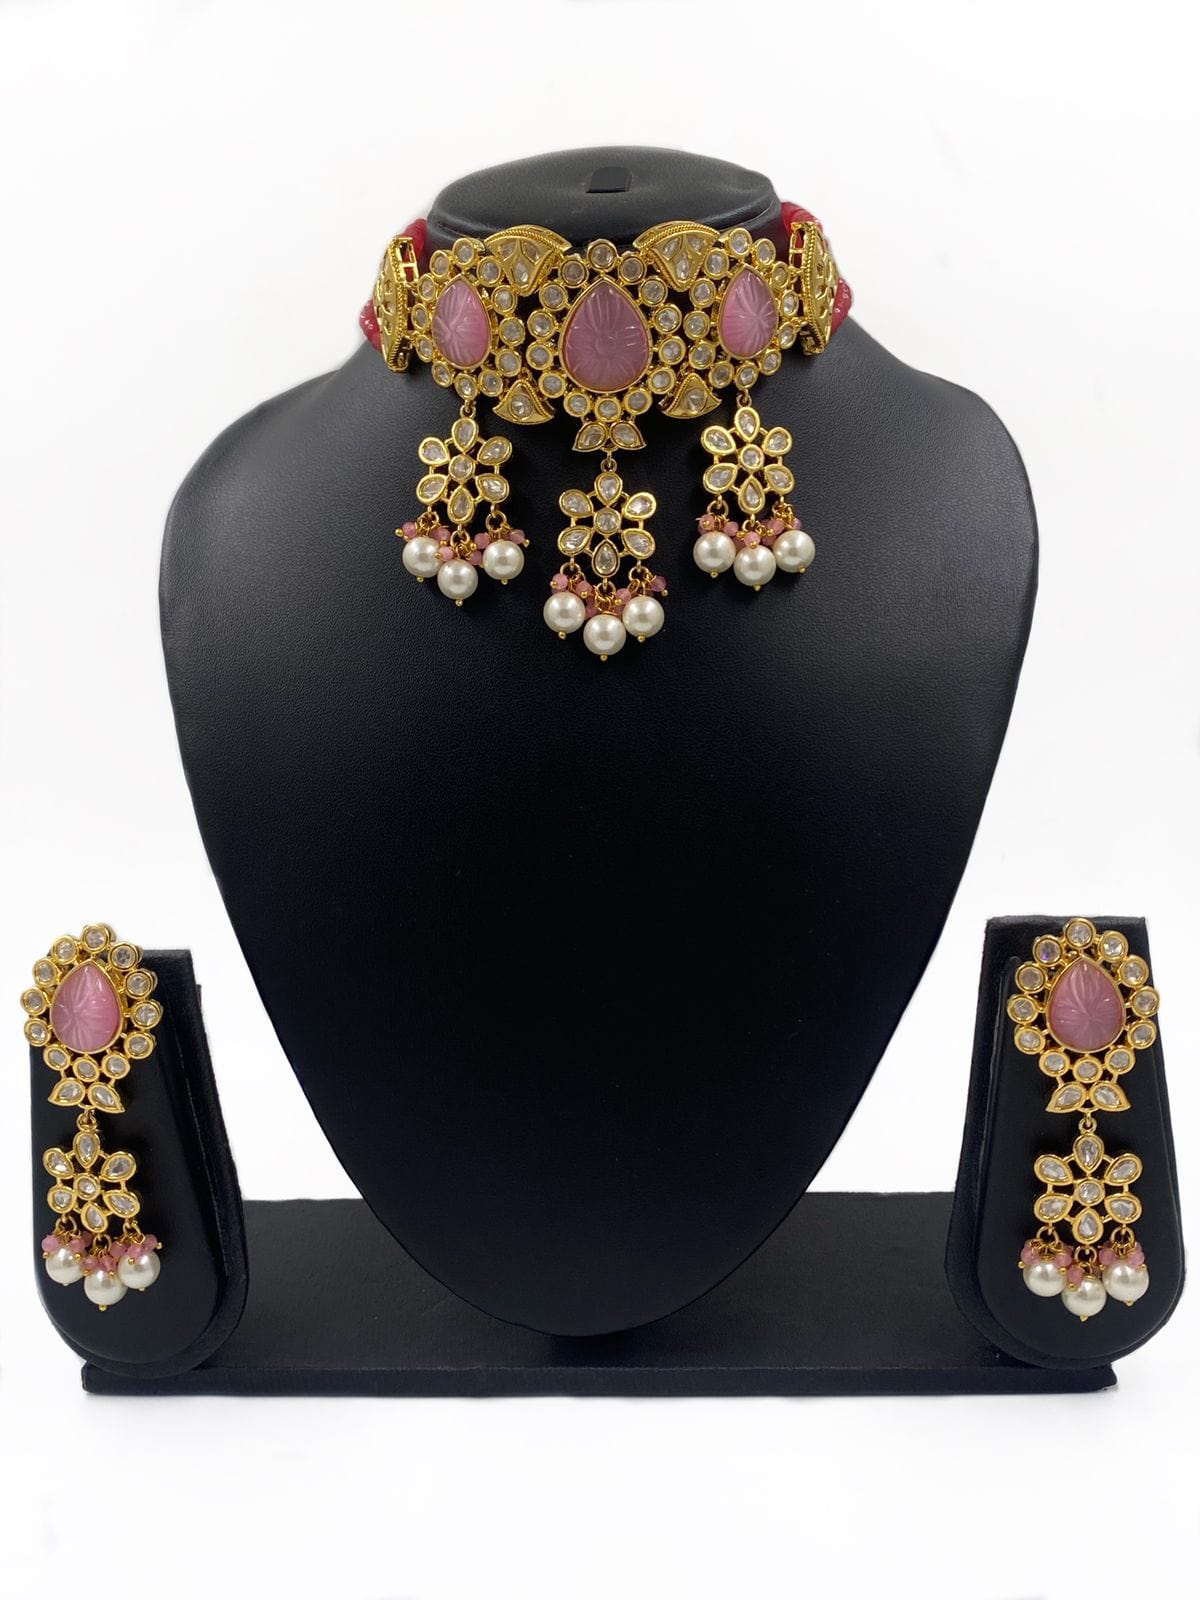 Exclusive High Quality Kundan Choker Necklace Set For Weddings By Gehna Shop Choker Necklace Set